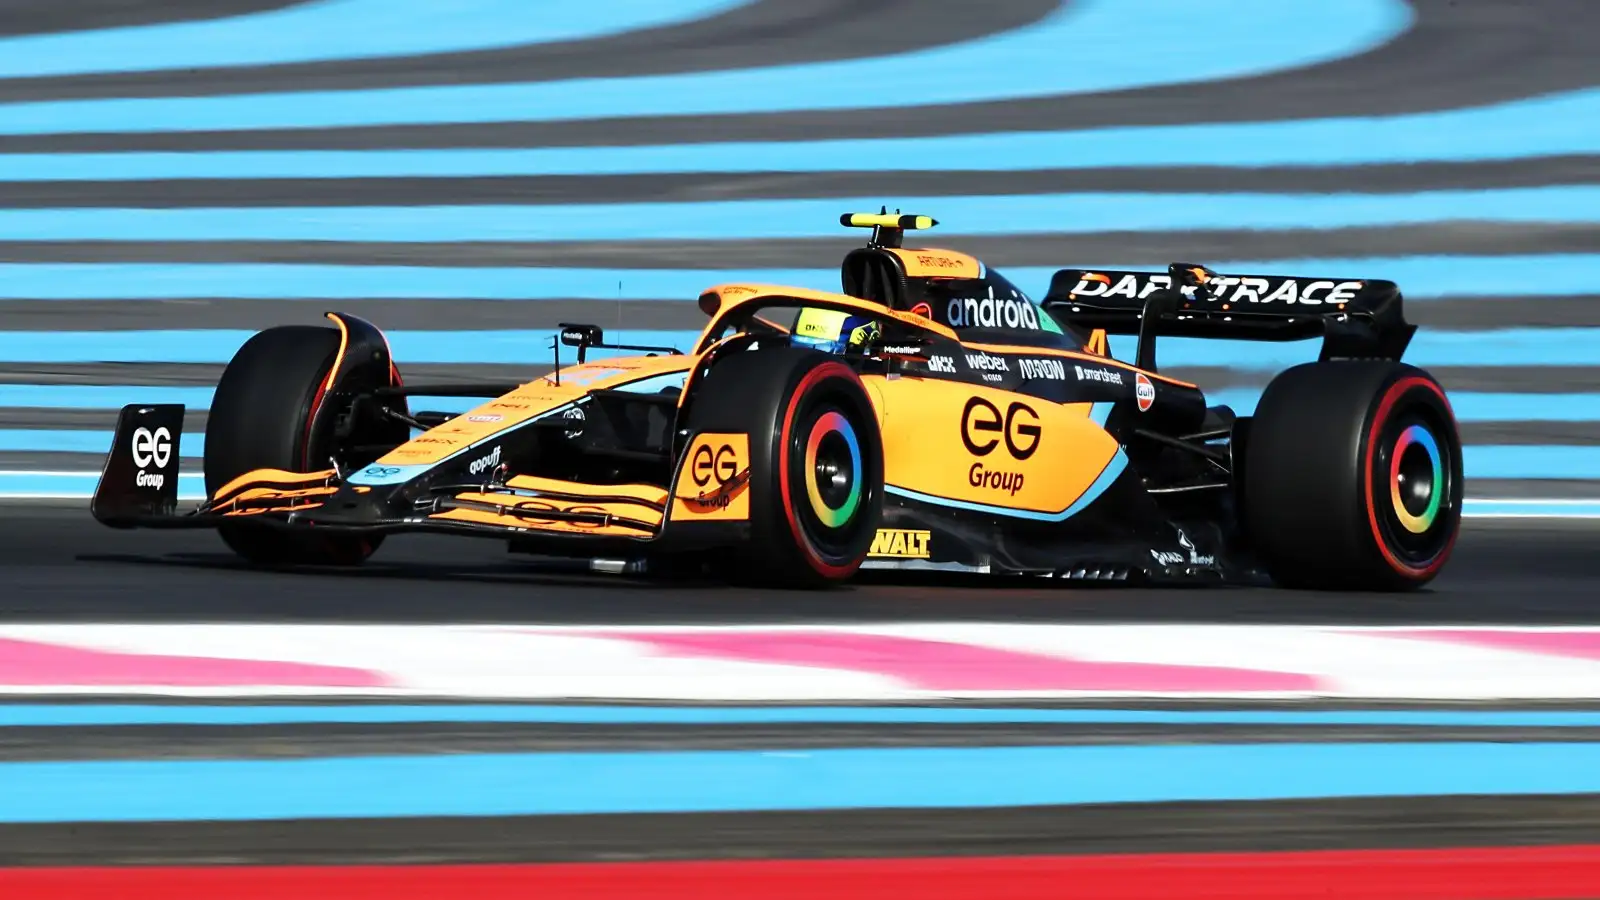 Lando Norris during the French Grand Prix practice session. Paul Ricard, July 2022.